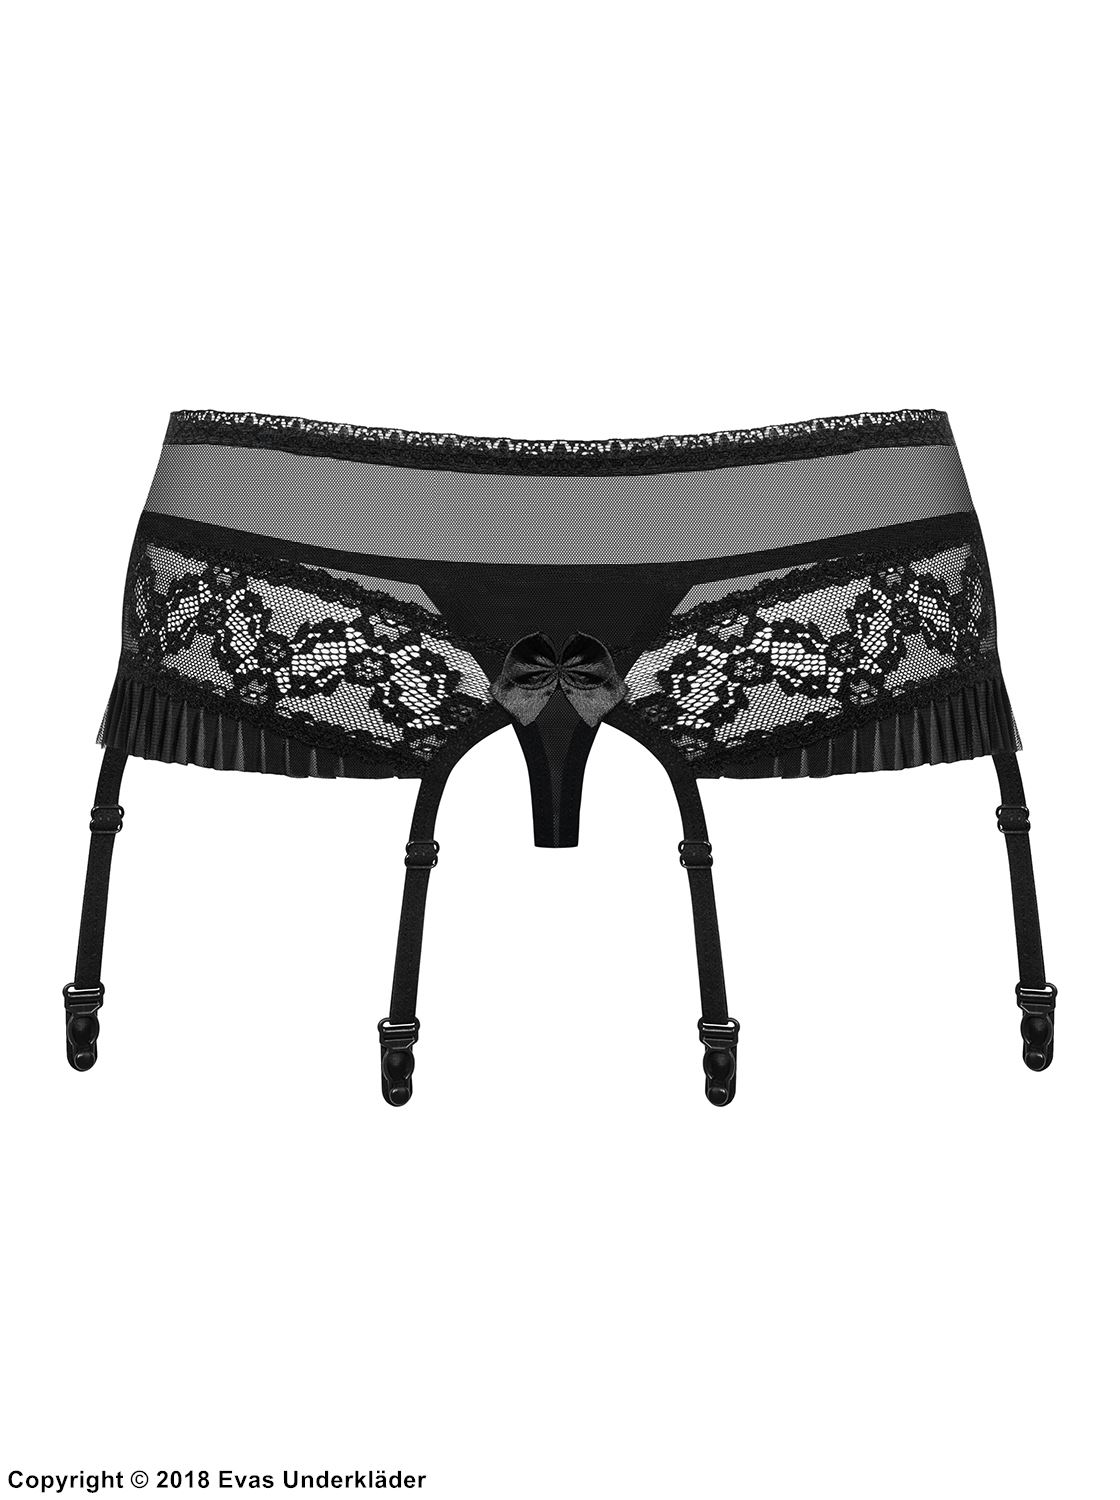 Garter belt and panty, floral lace, mesh inlay, pleated trim